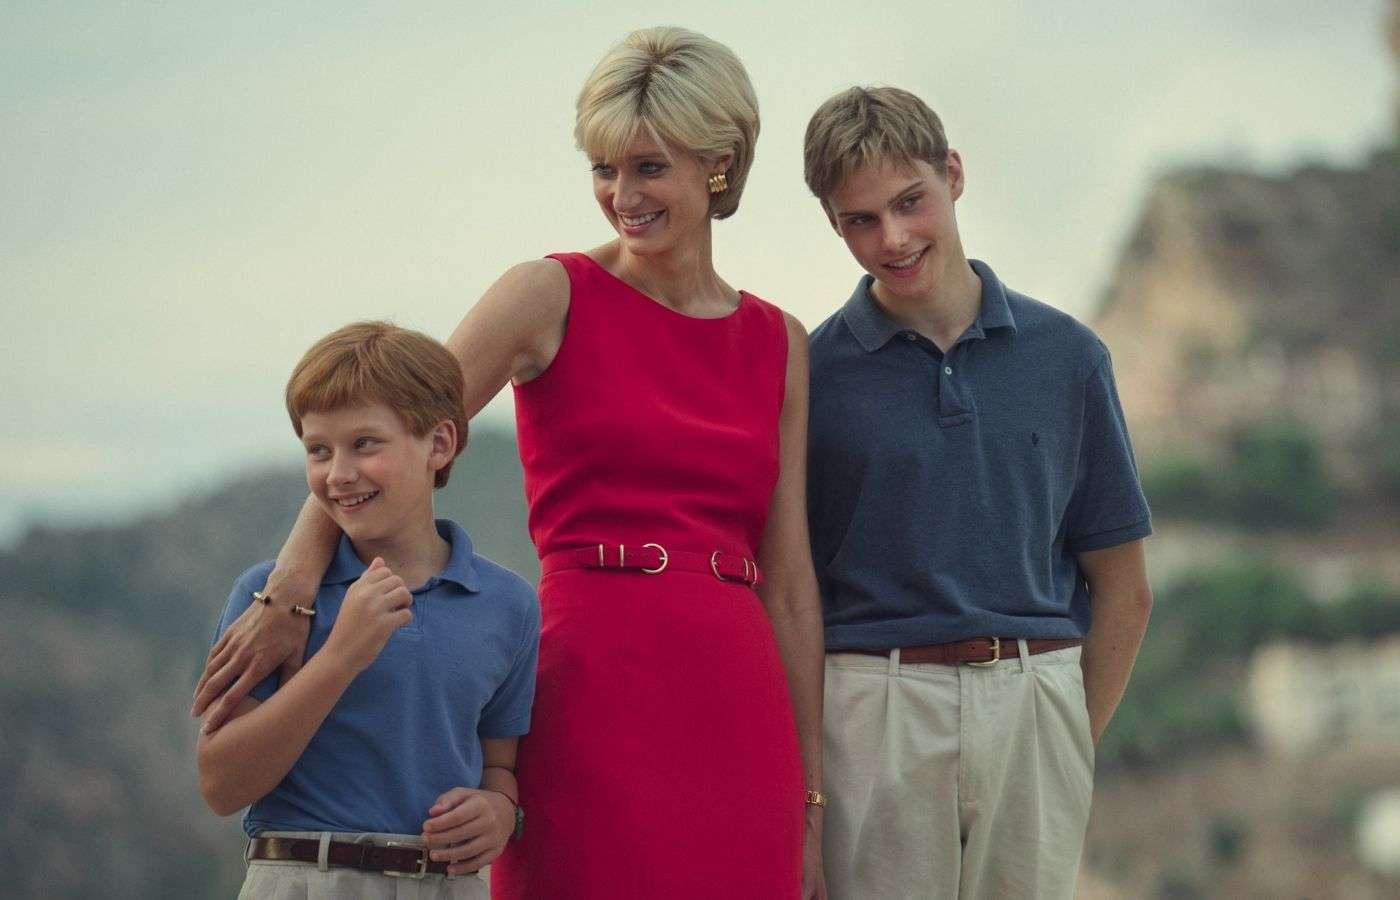 Diana, Harry, and William in The Crown Season 6